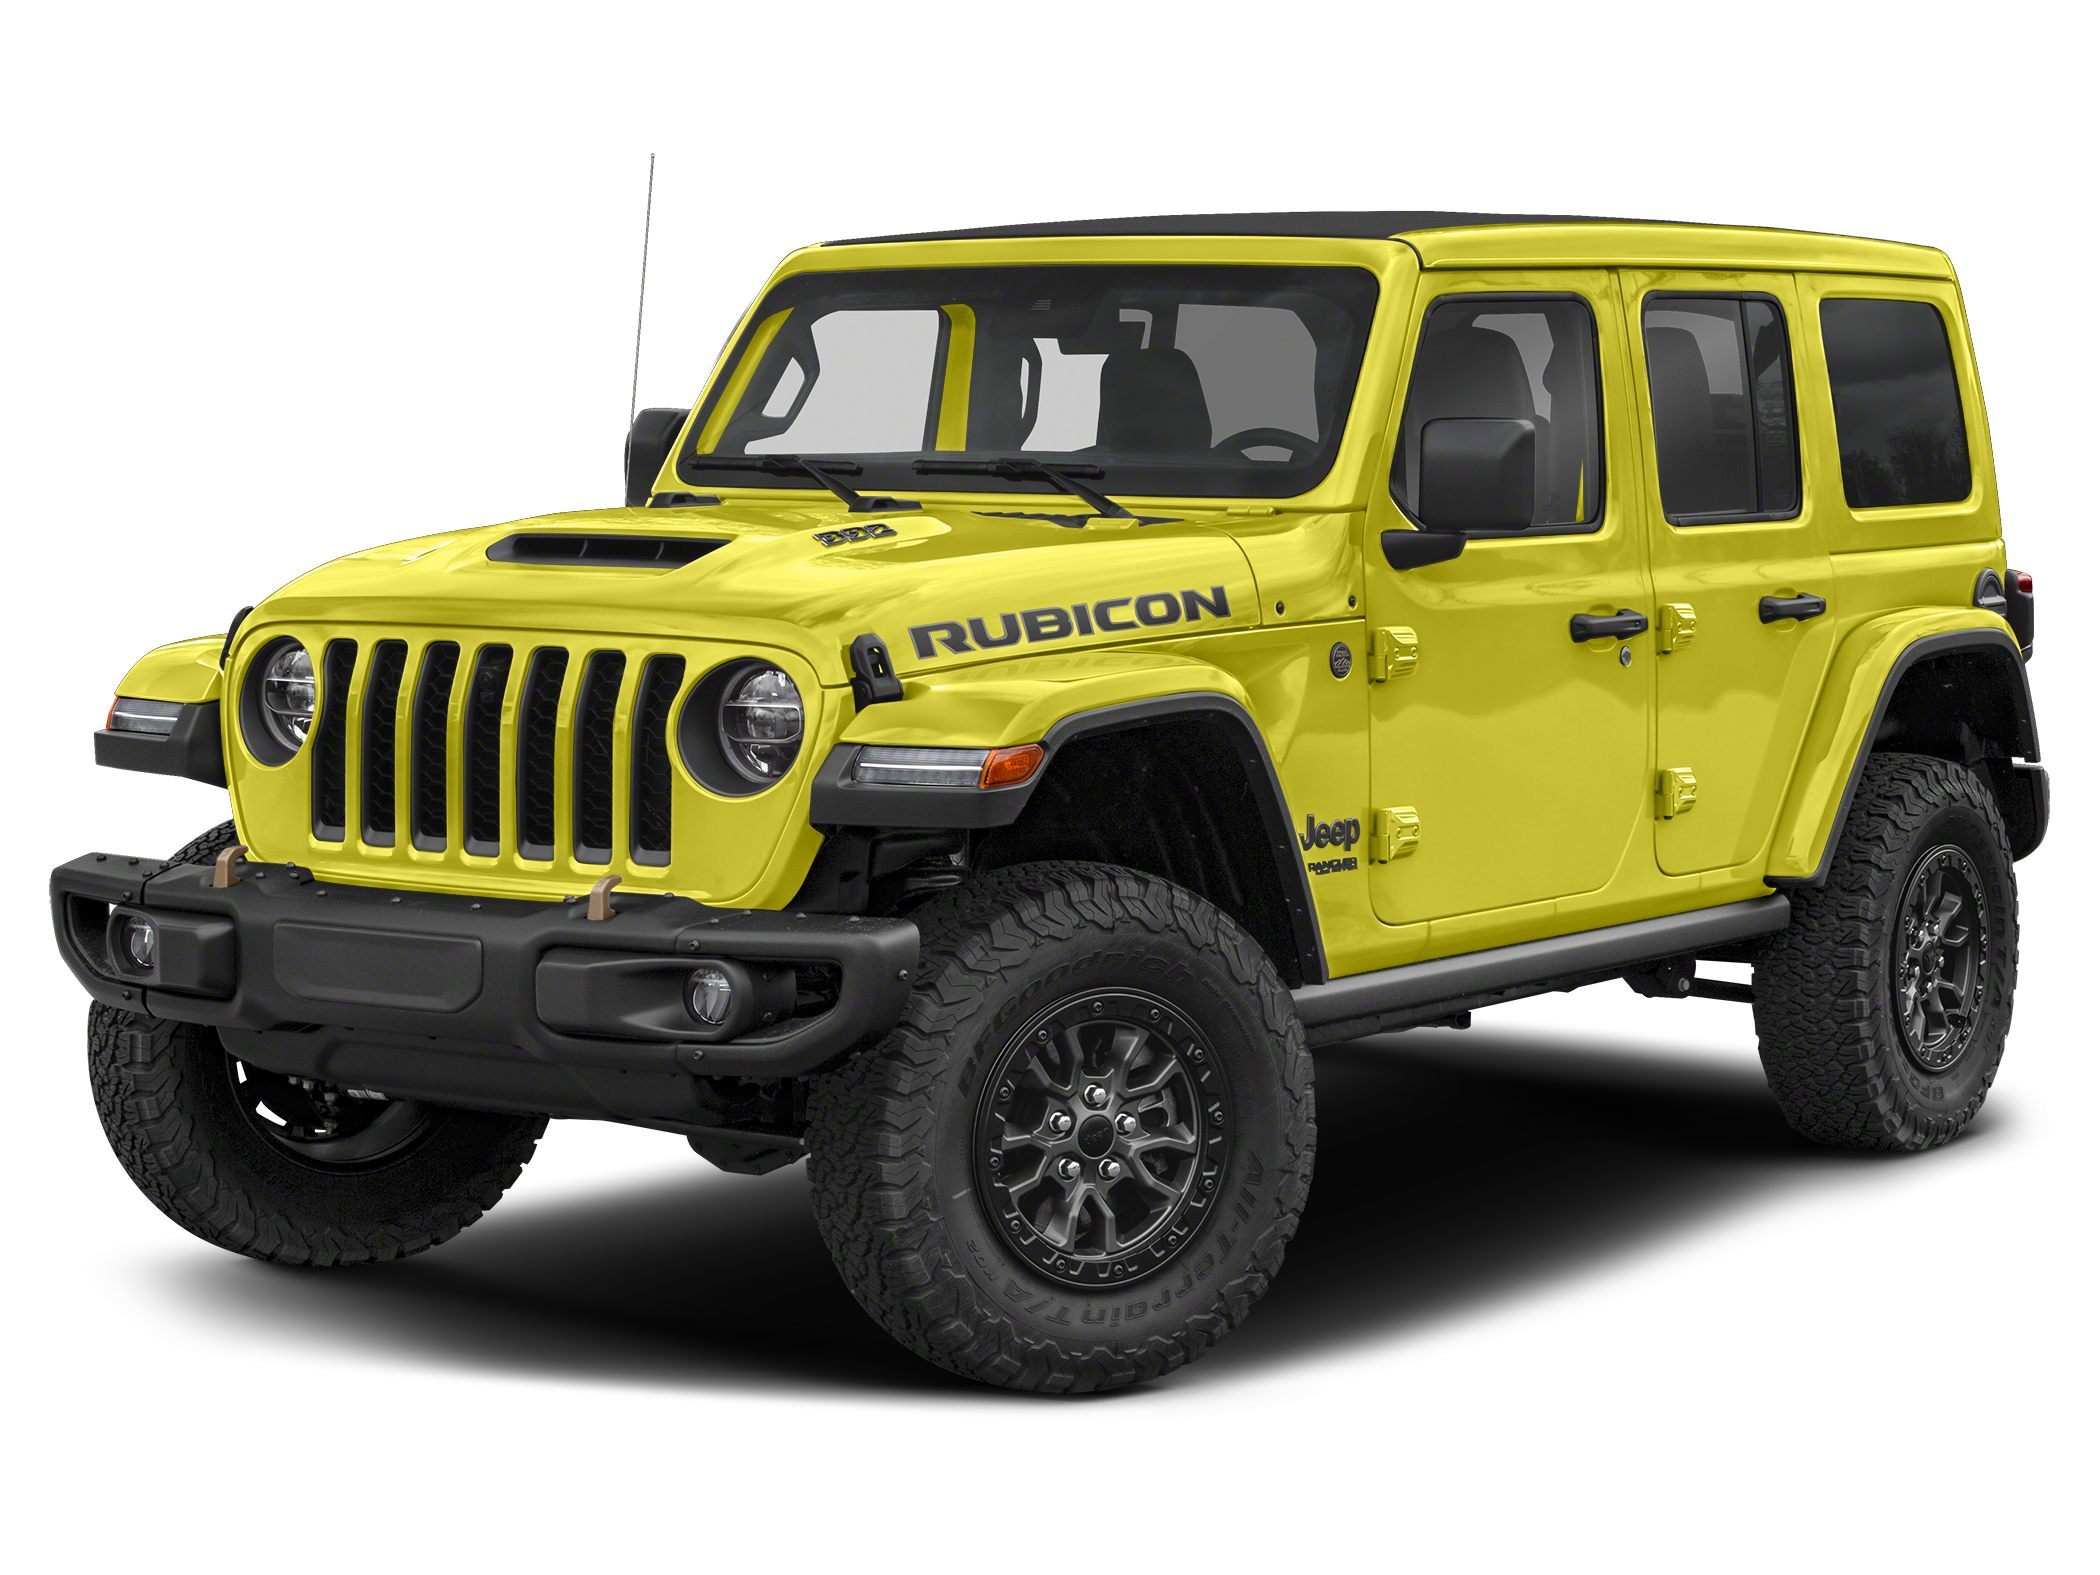 Used 2022 Jeep Wrangler Unlimited Rubicon 392 For Sale | Fort Myers FL